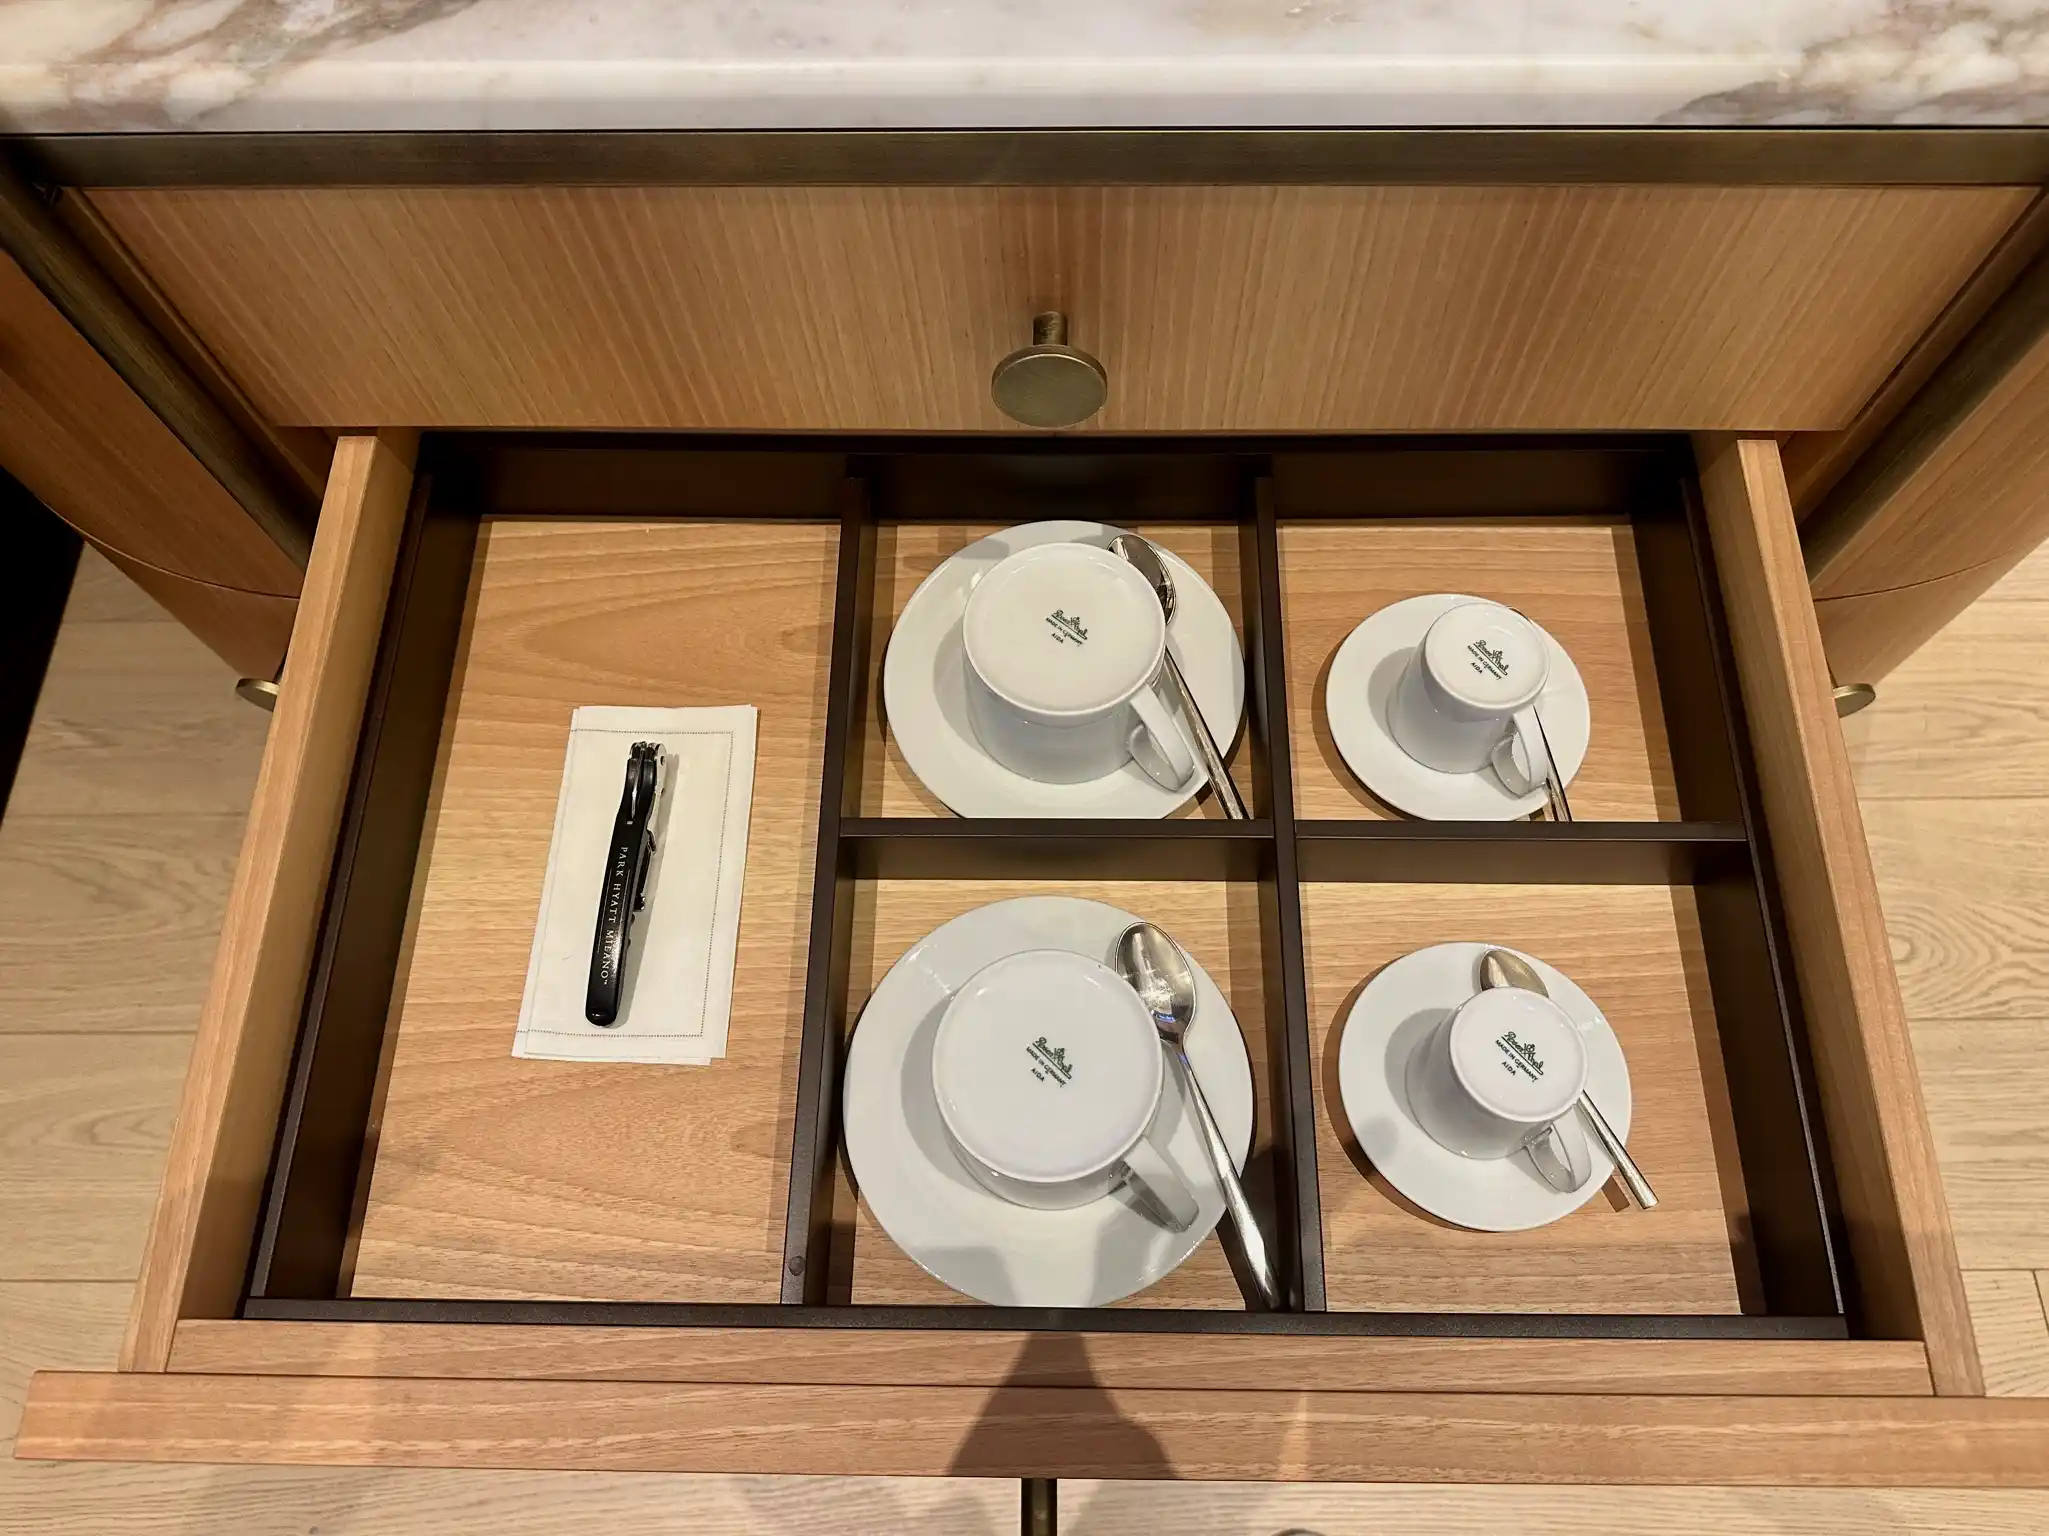 a drawer with a drawer full of teacups and saucers